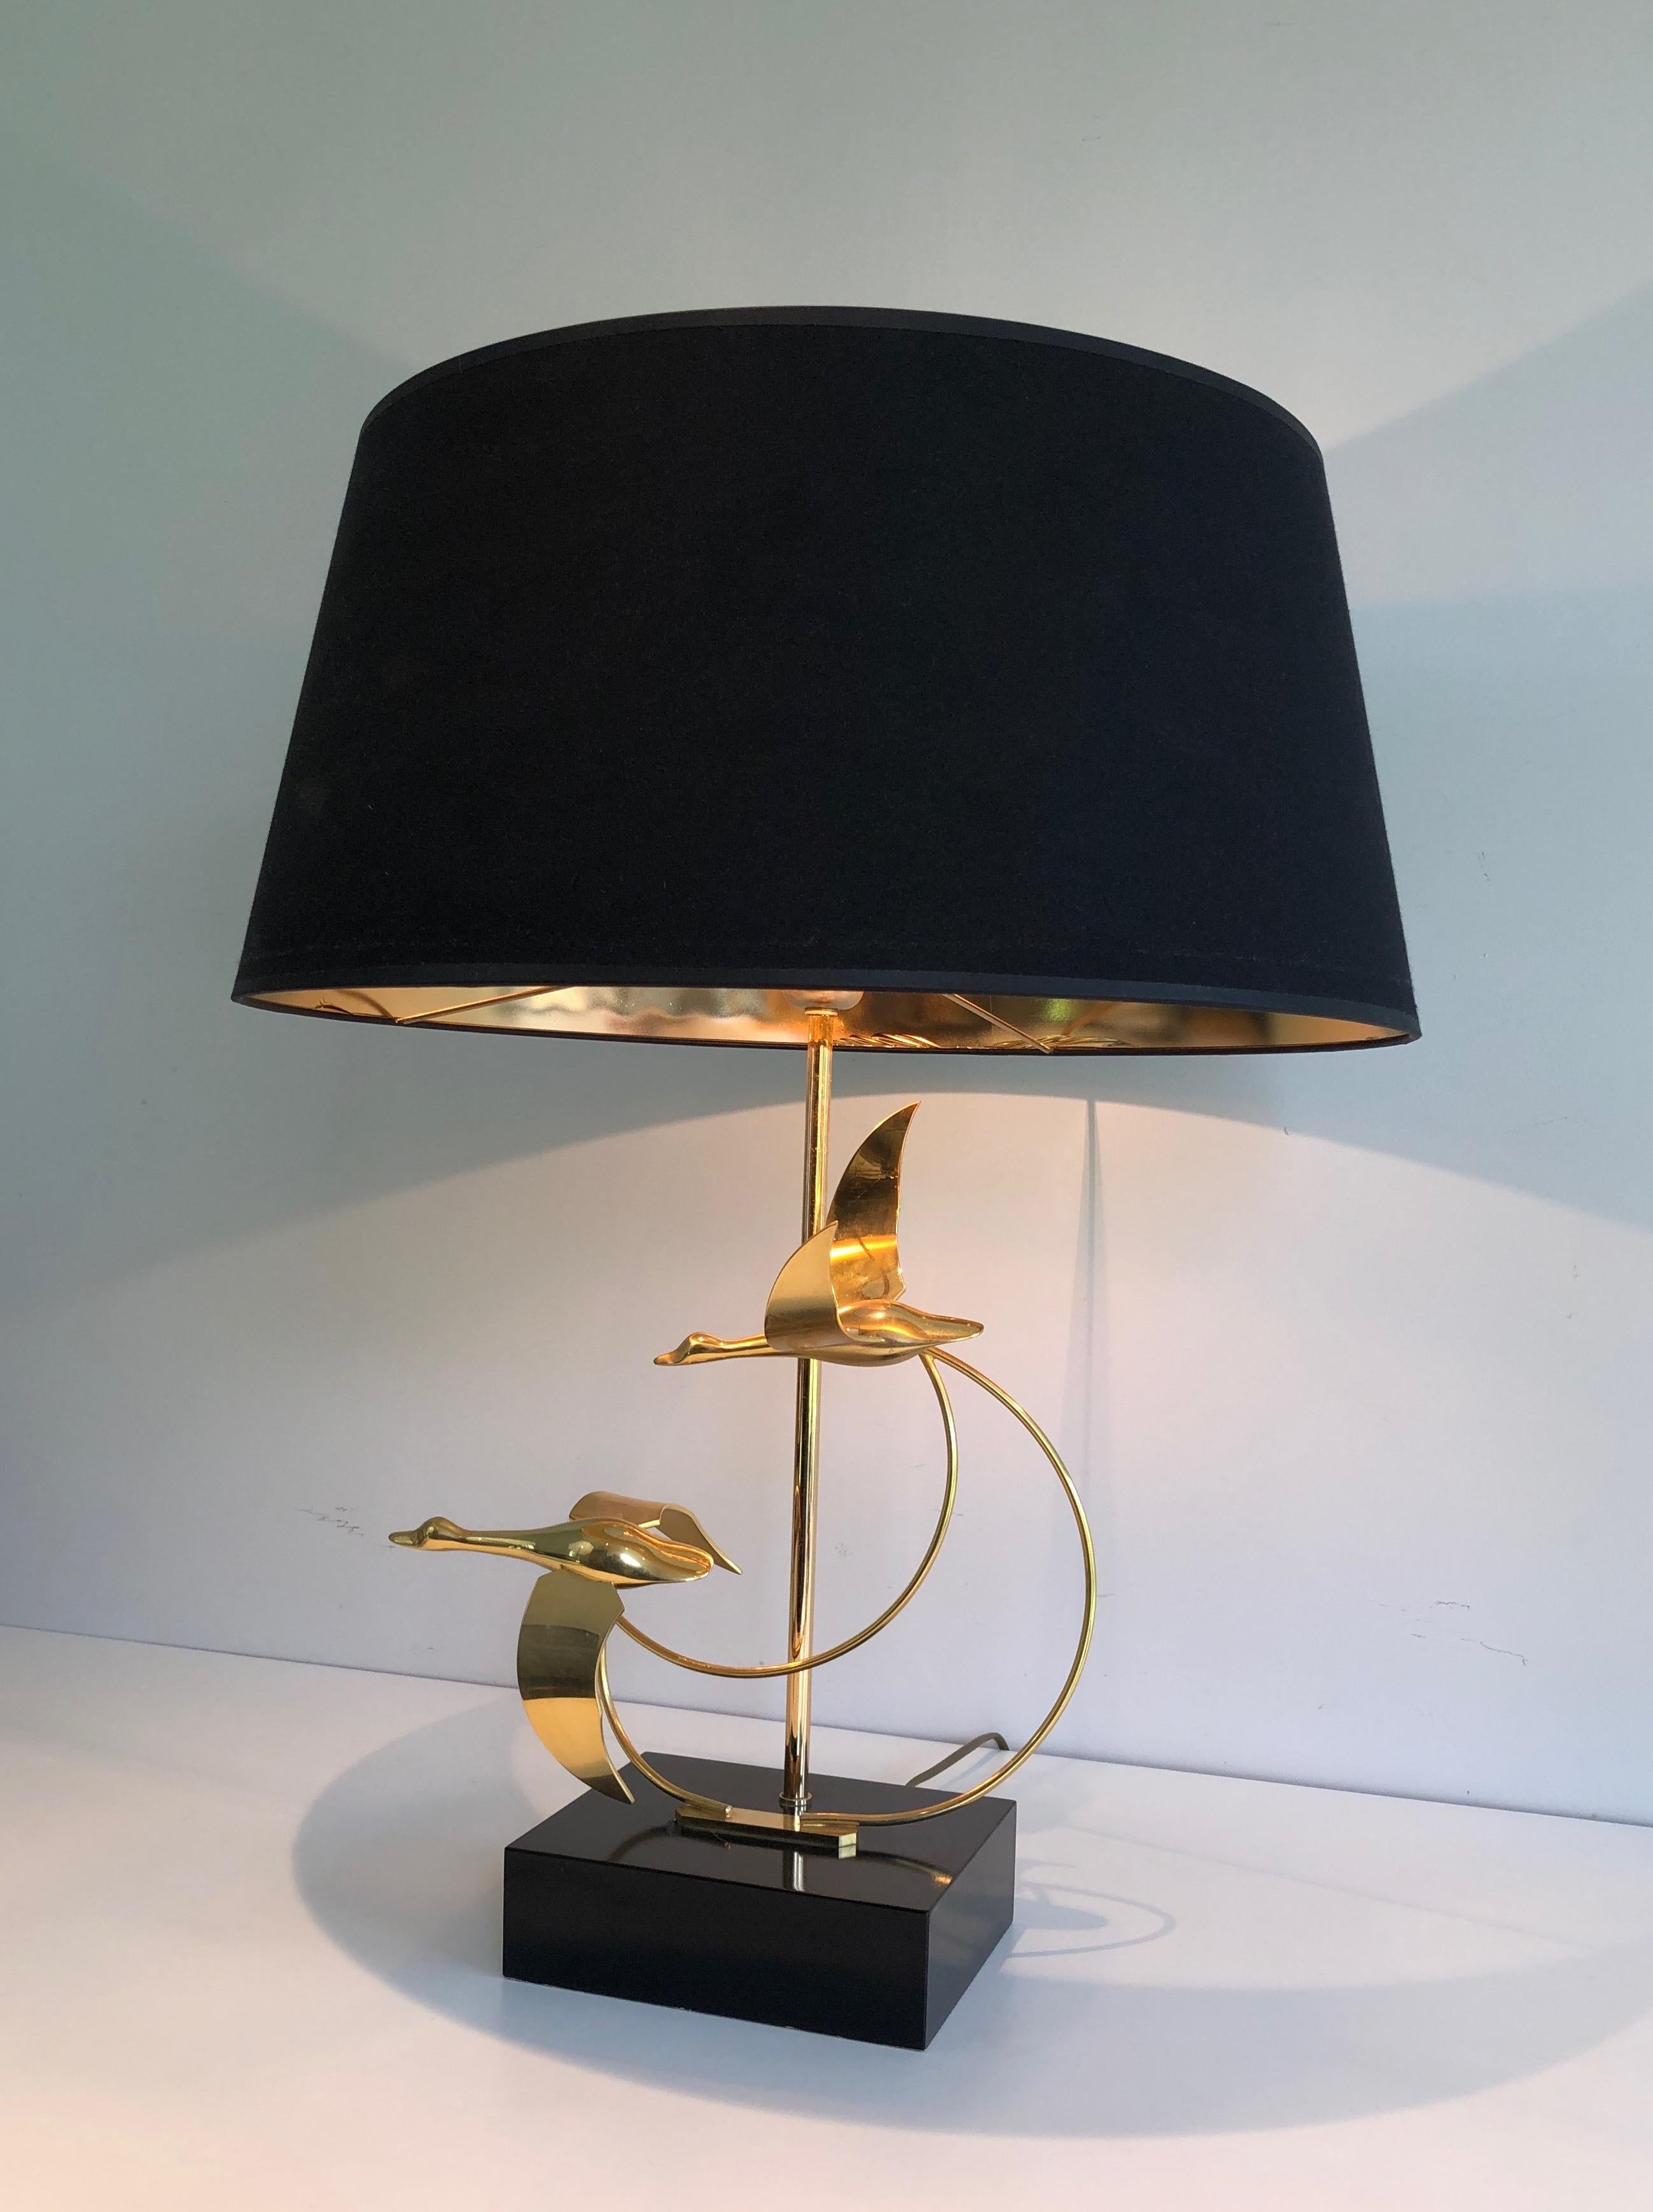 Flock of Wild Geese Brass Table Lamp, French, circa 1970 For Sale 7